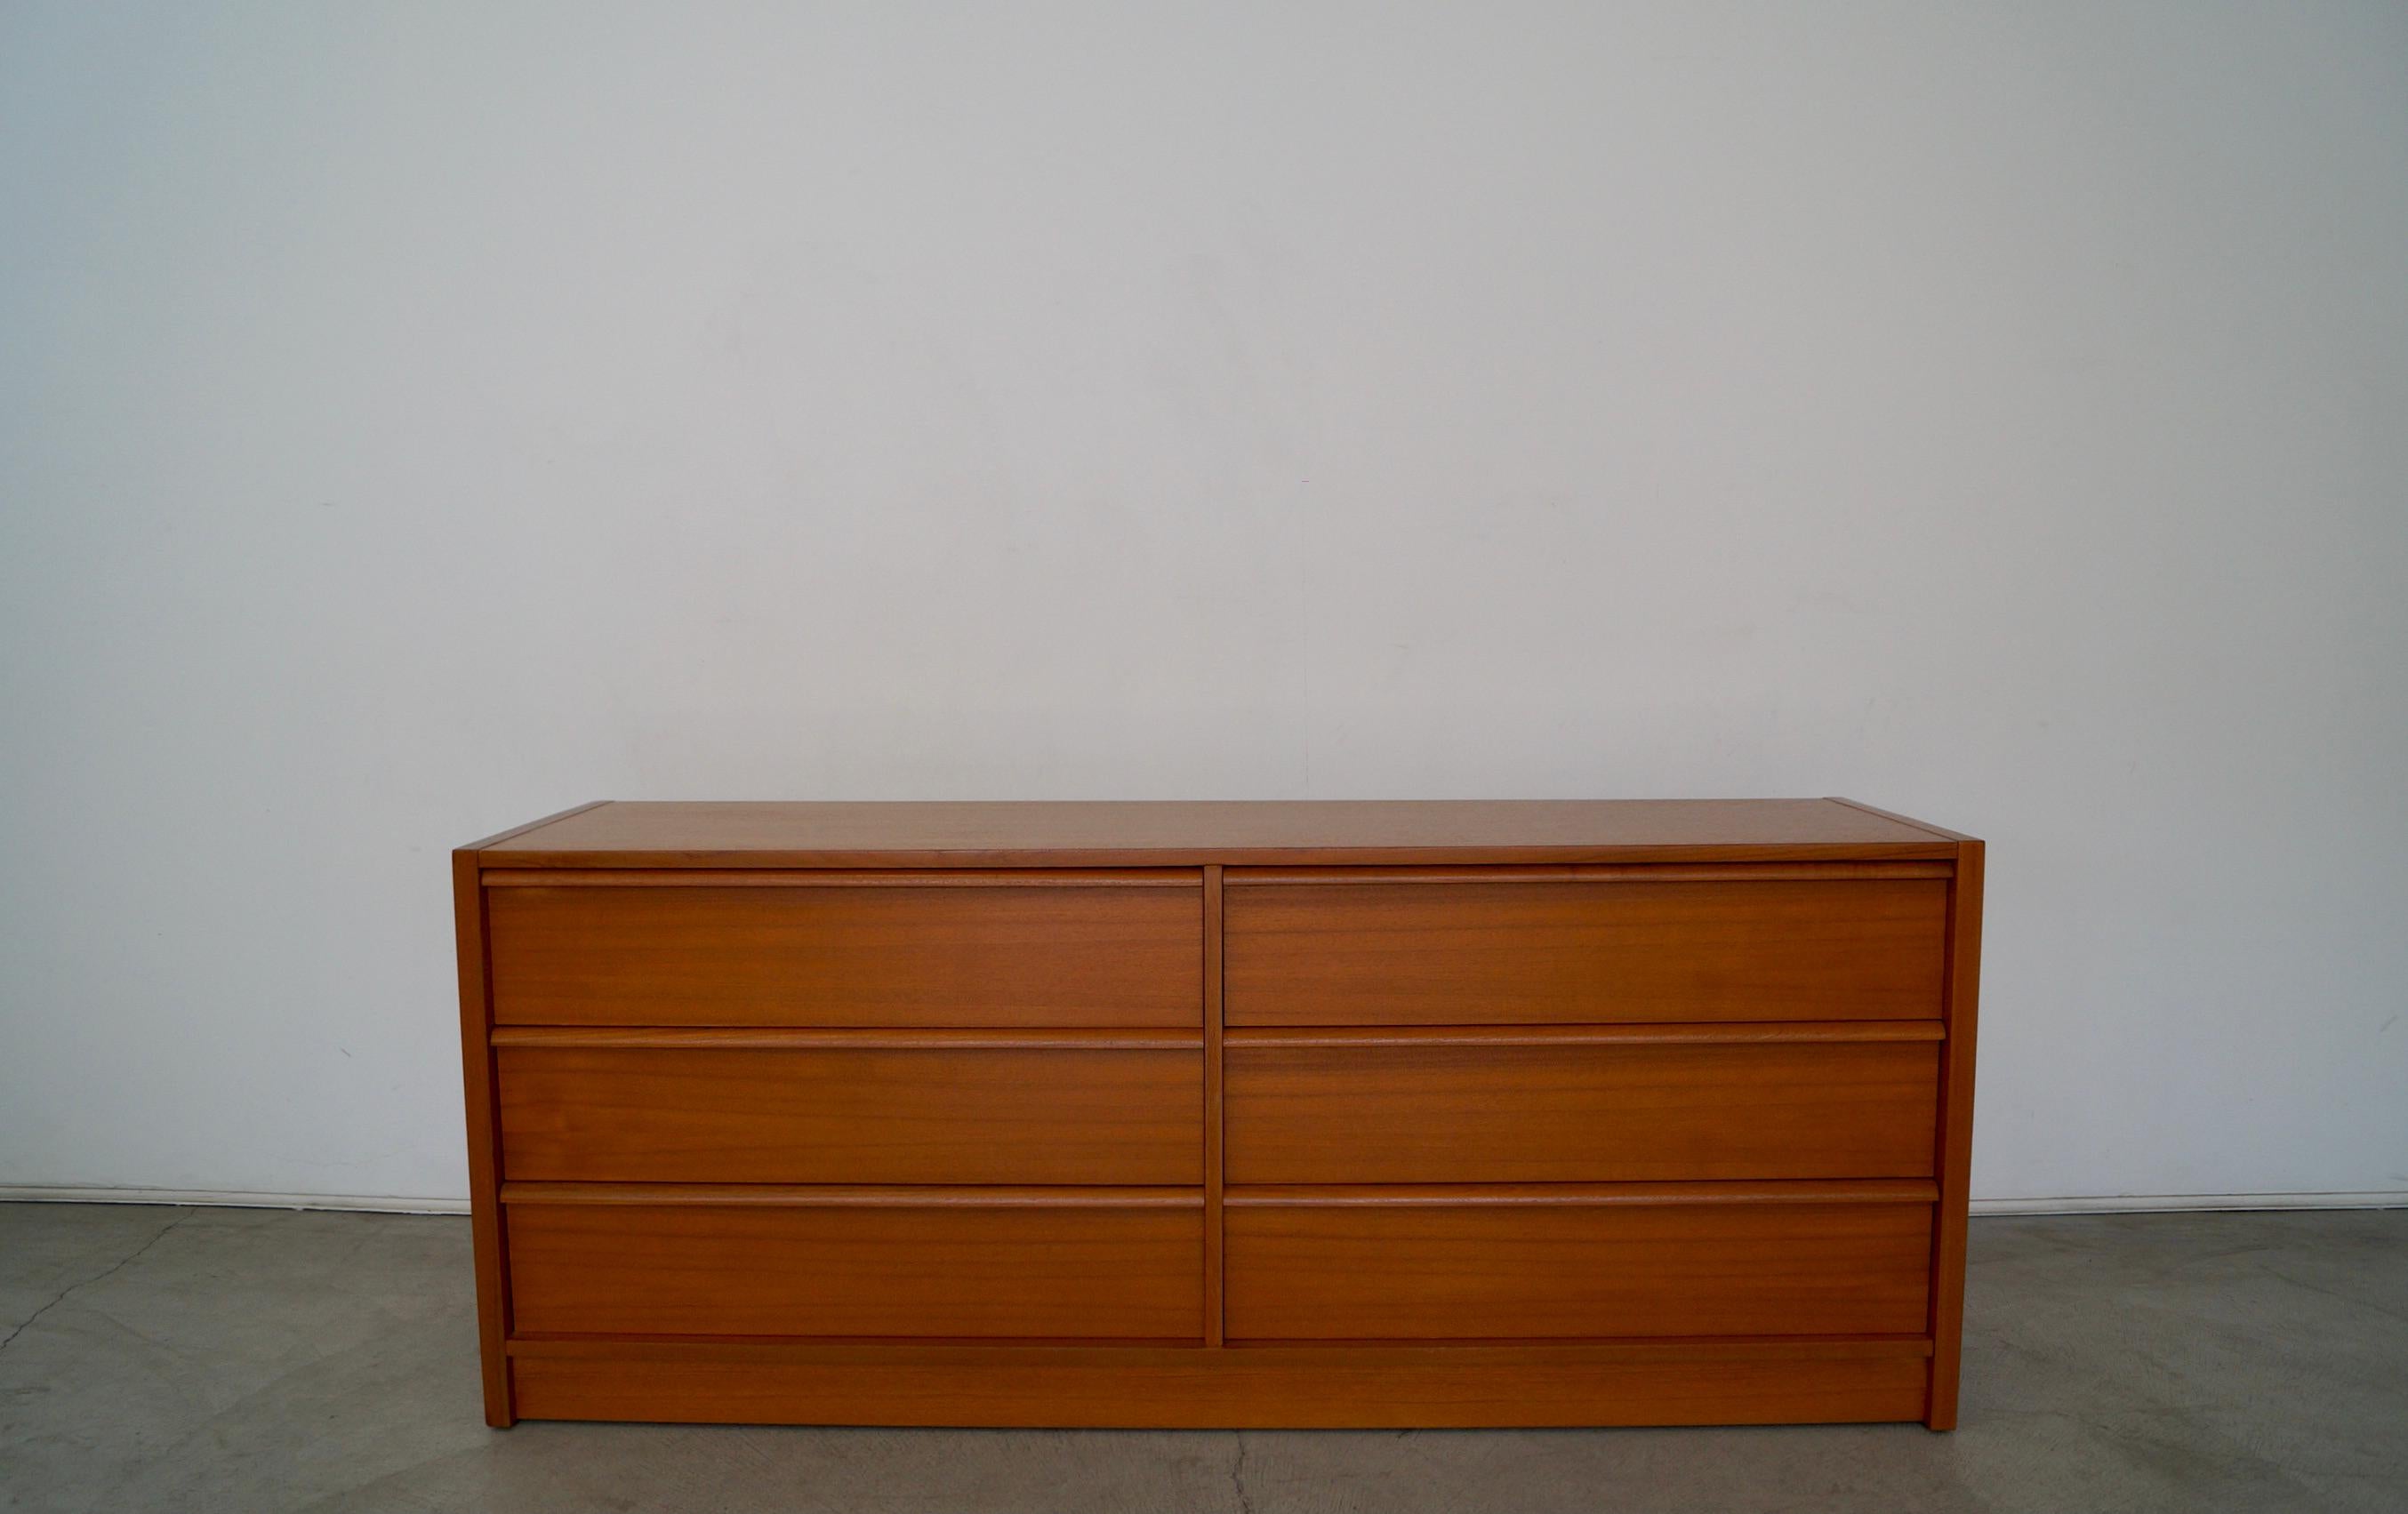 Vintage Mid-century Modern lowboy for sale. Manufactured in the 1970's, and was made in Denmark. It's made of teak, and has great solid construction. It has a clean design with the drawer pulls sculpted in the wood. All drawers are dovetailed on